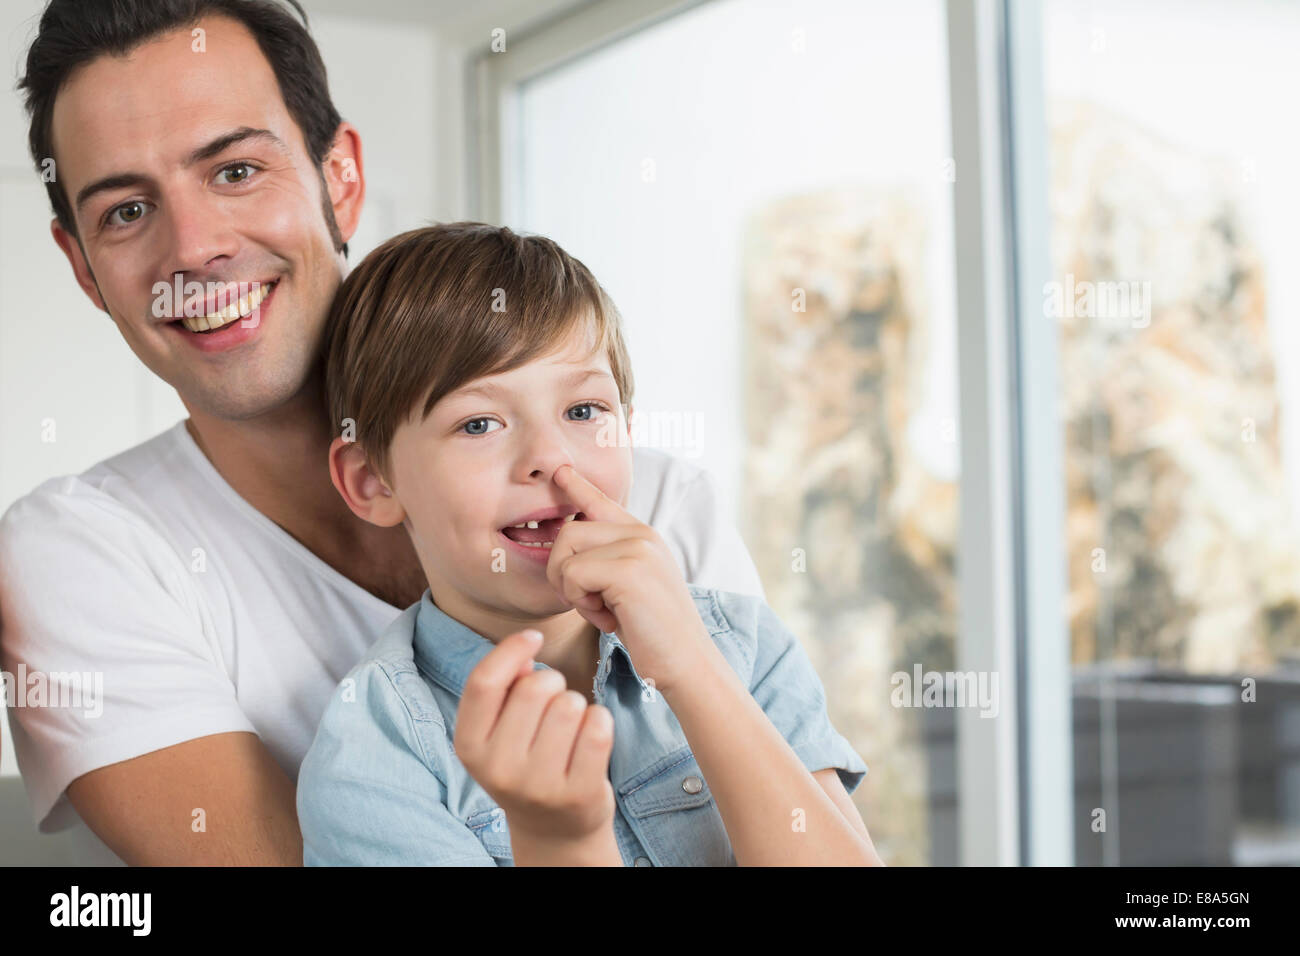 Smiling father with son picking nose Stock Photo